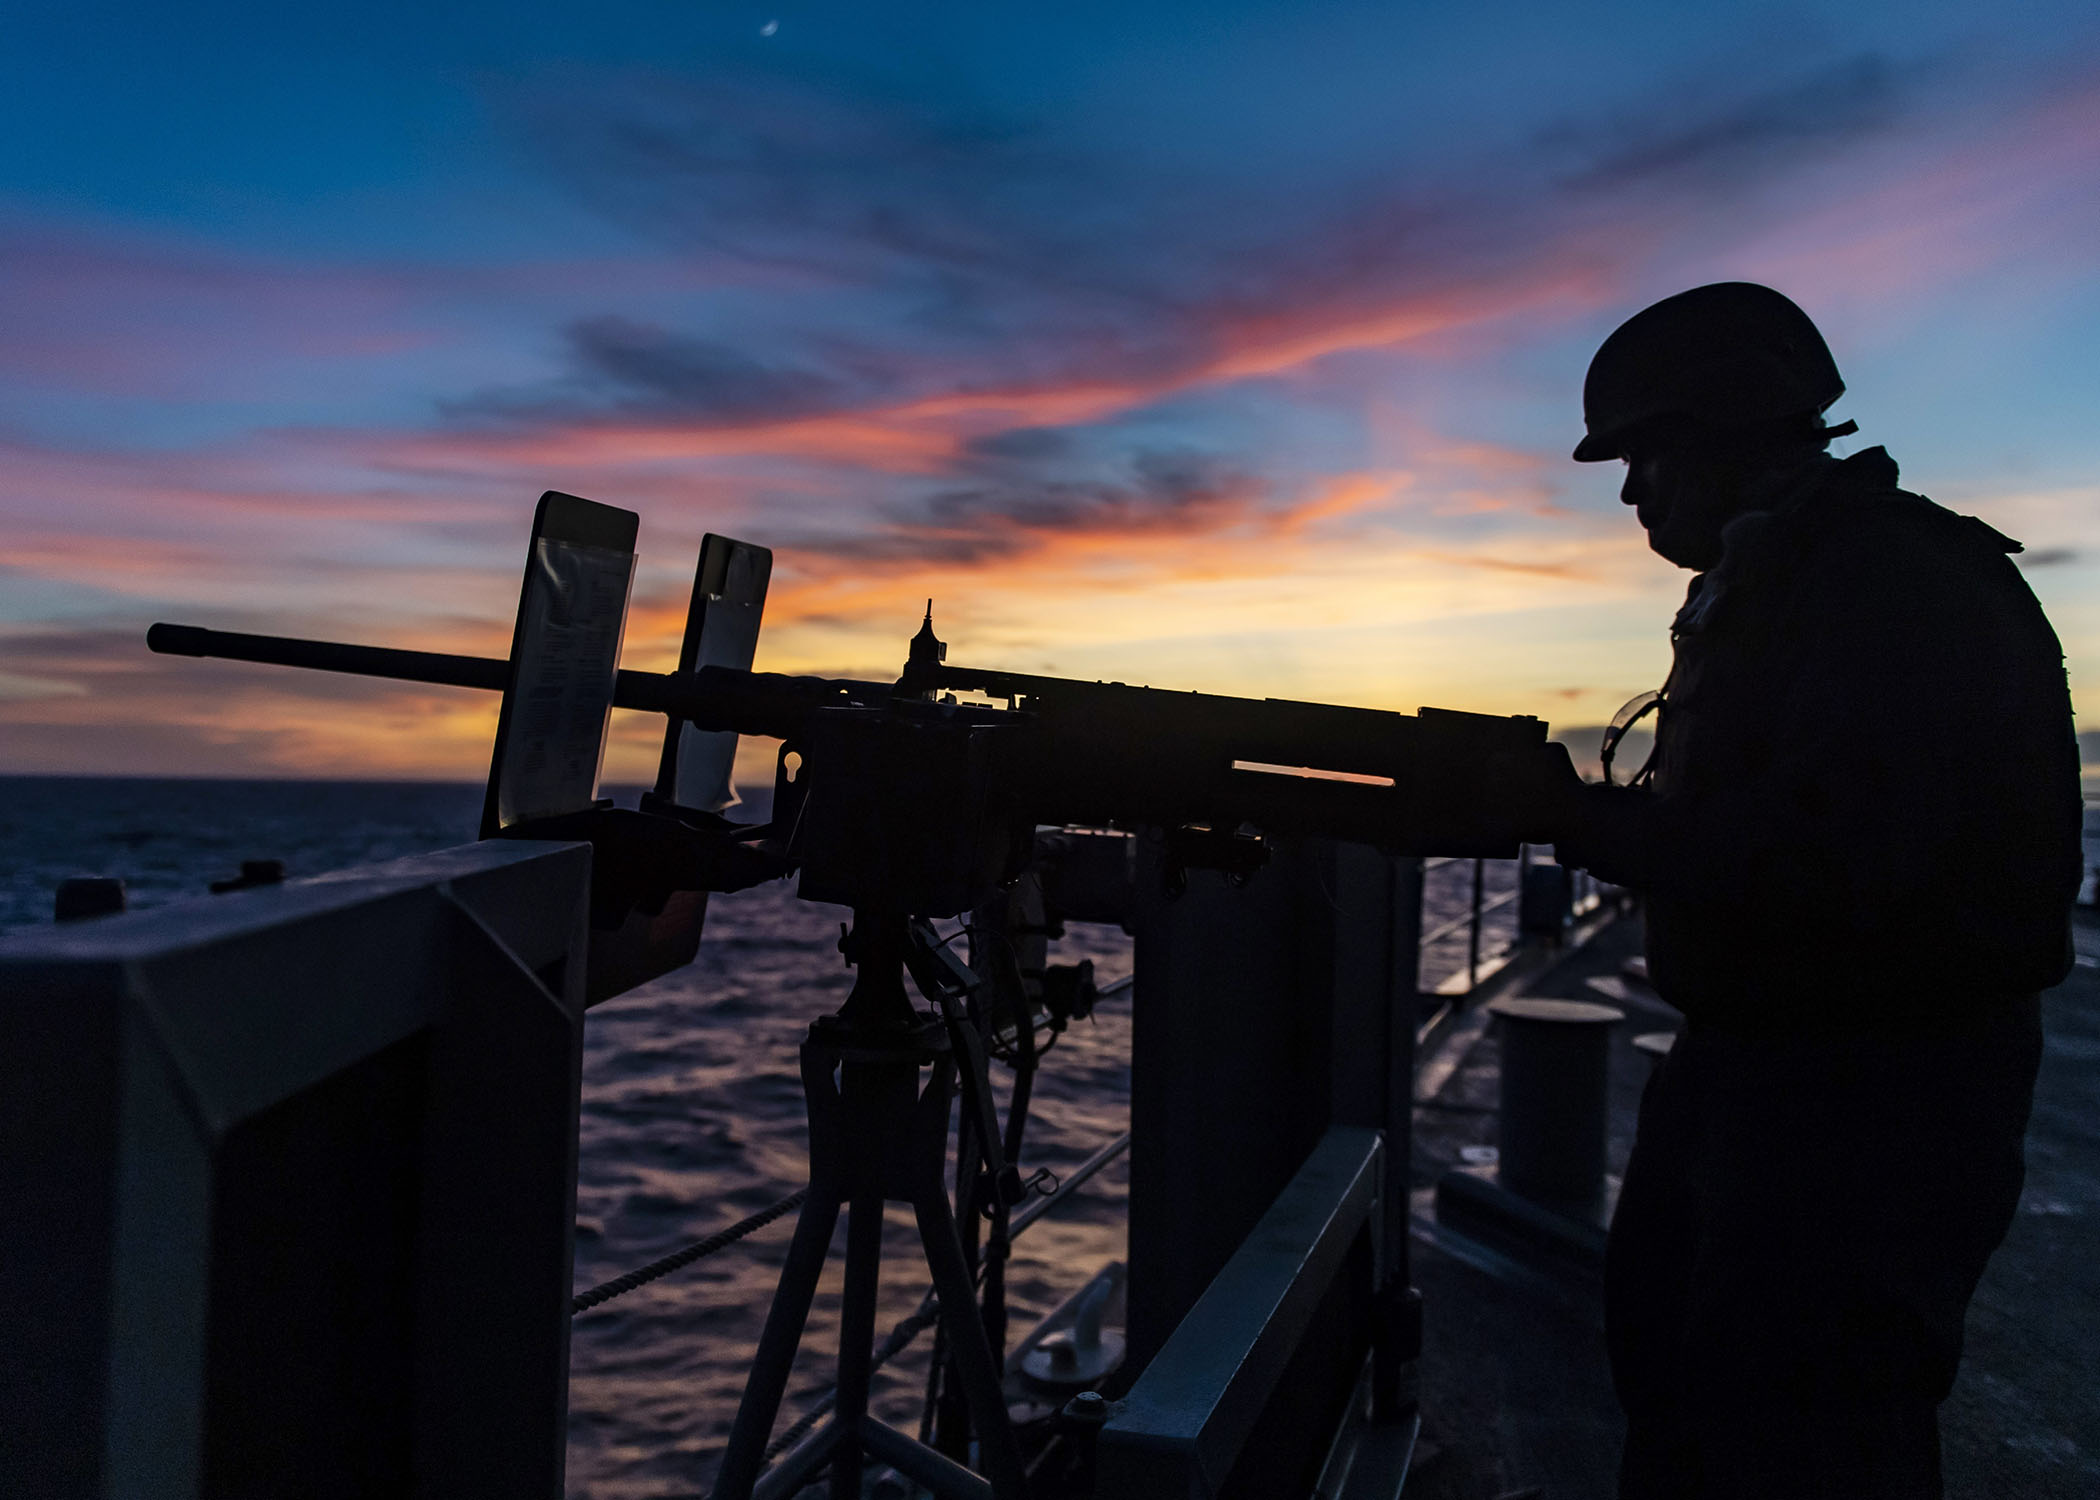 sailor manning a gun at sea during training with sunset in the background